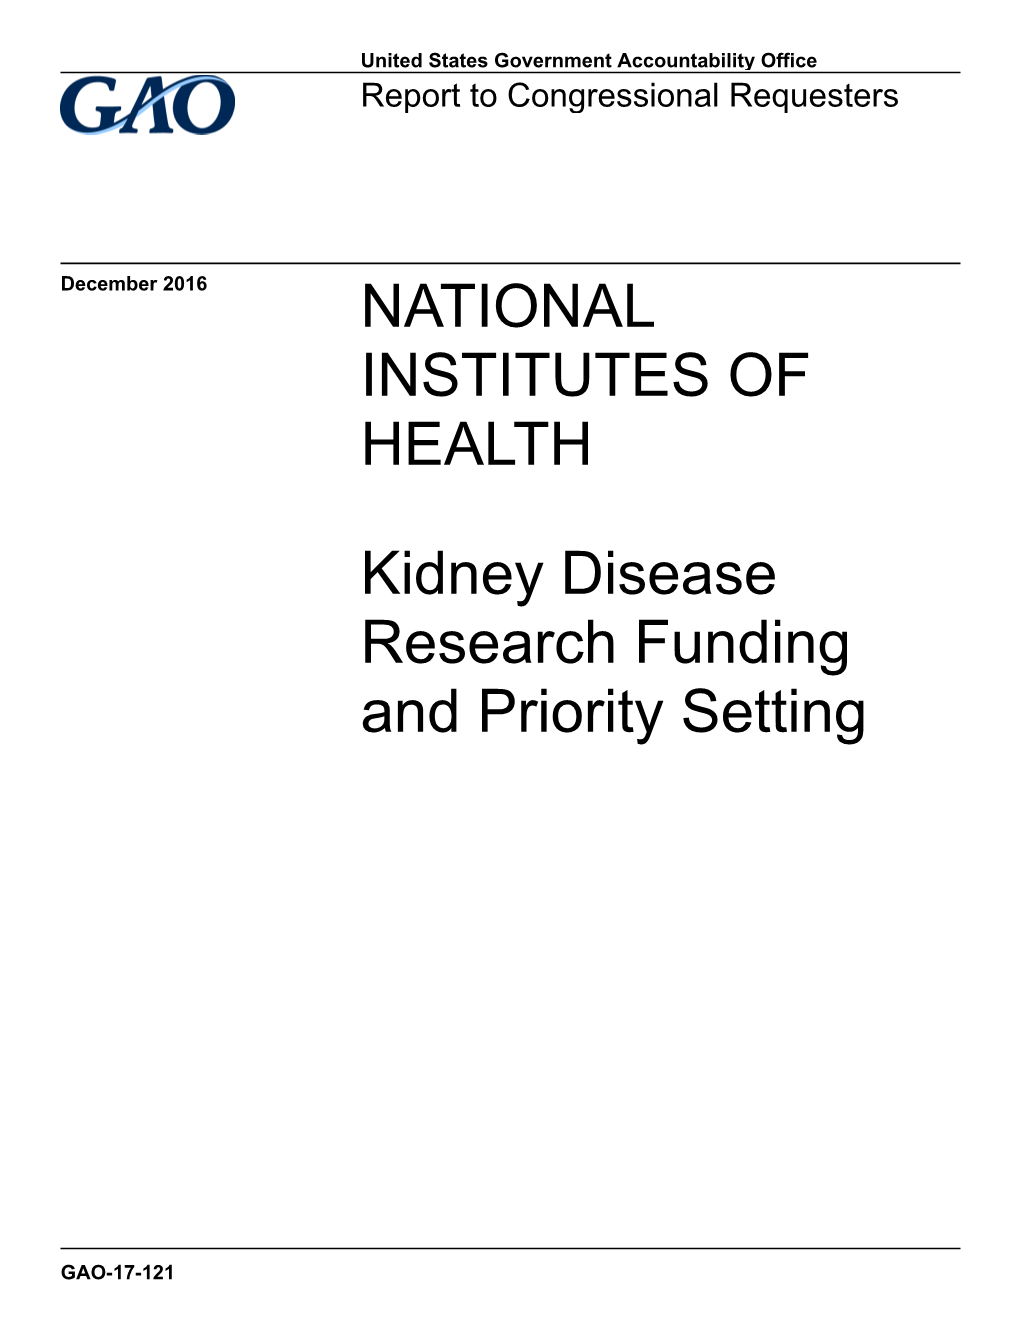 Kidney Disease Research Funding and Priority Setting